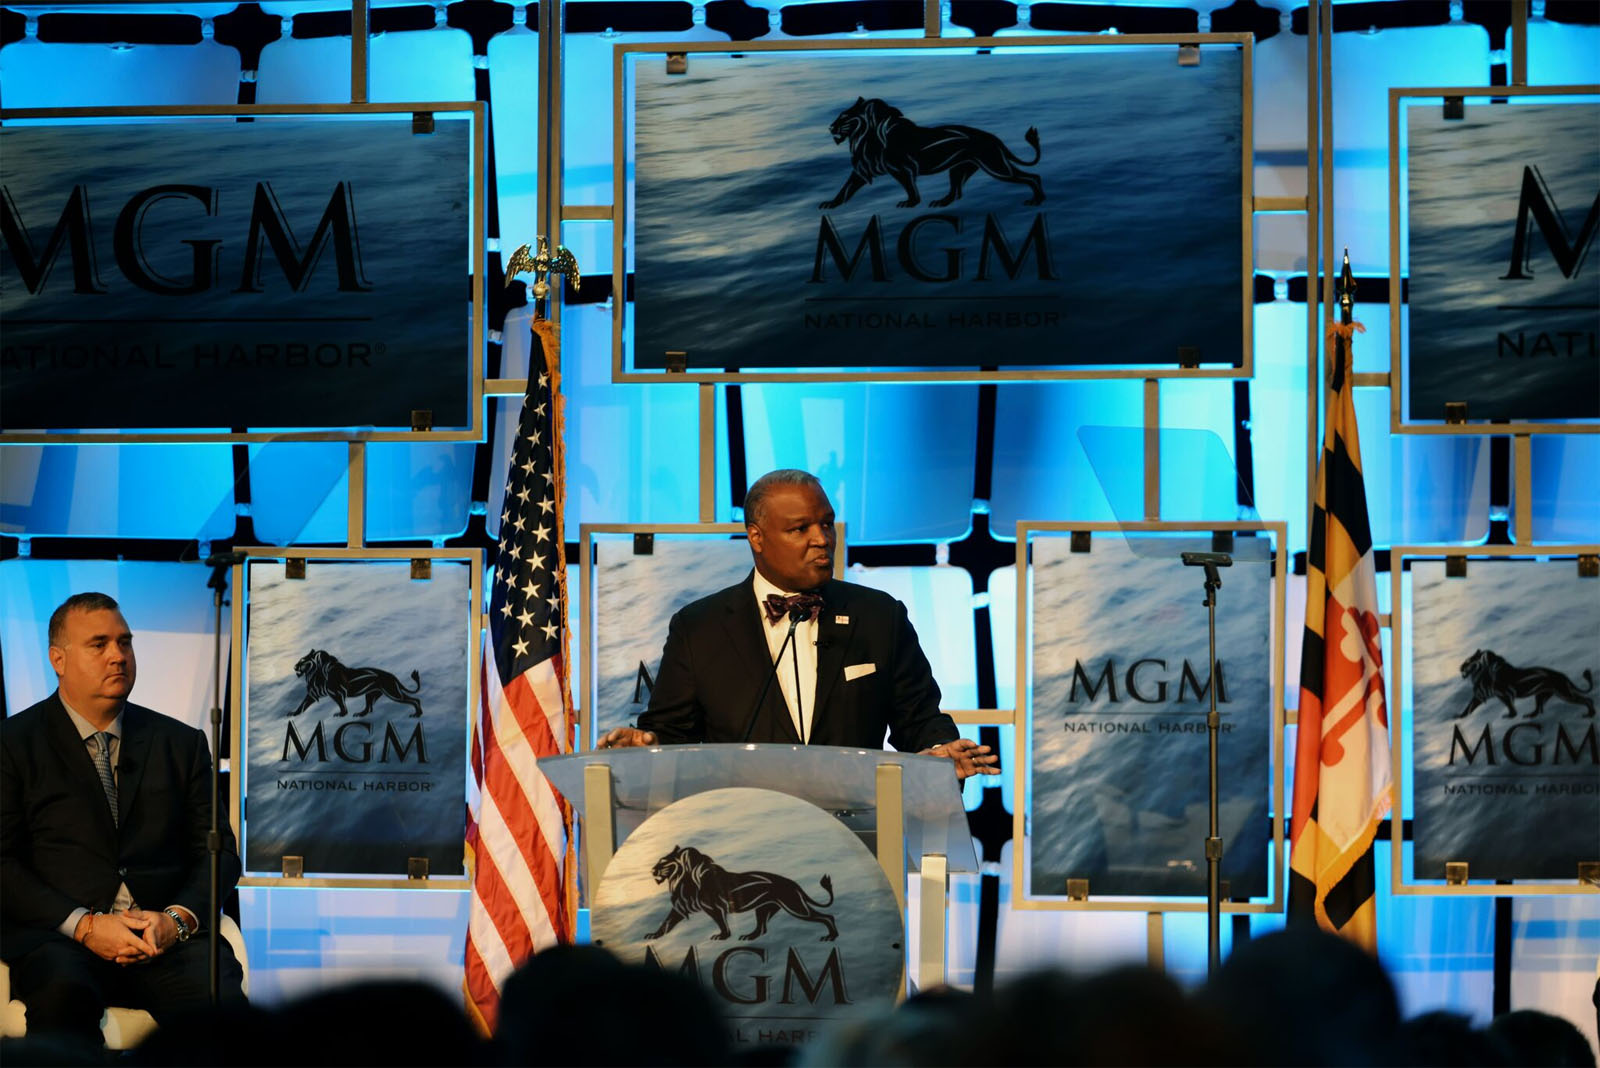 Prince George's County Executive Rushern Baker speaks at the grand opening ceremony for the MGM National Harbor Dec. 8. (Courtesy Shannon Finney, www.shannonfinneyphotography.com)